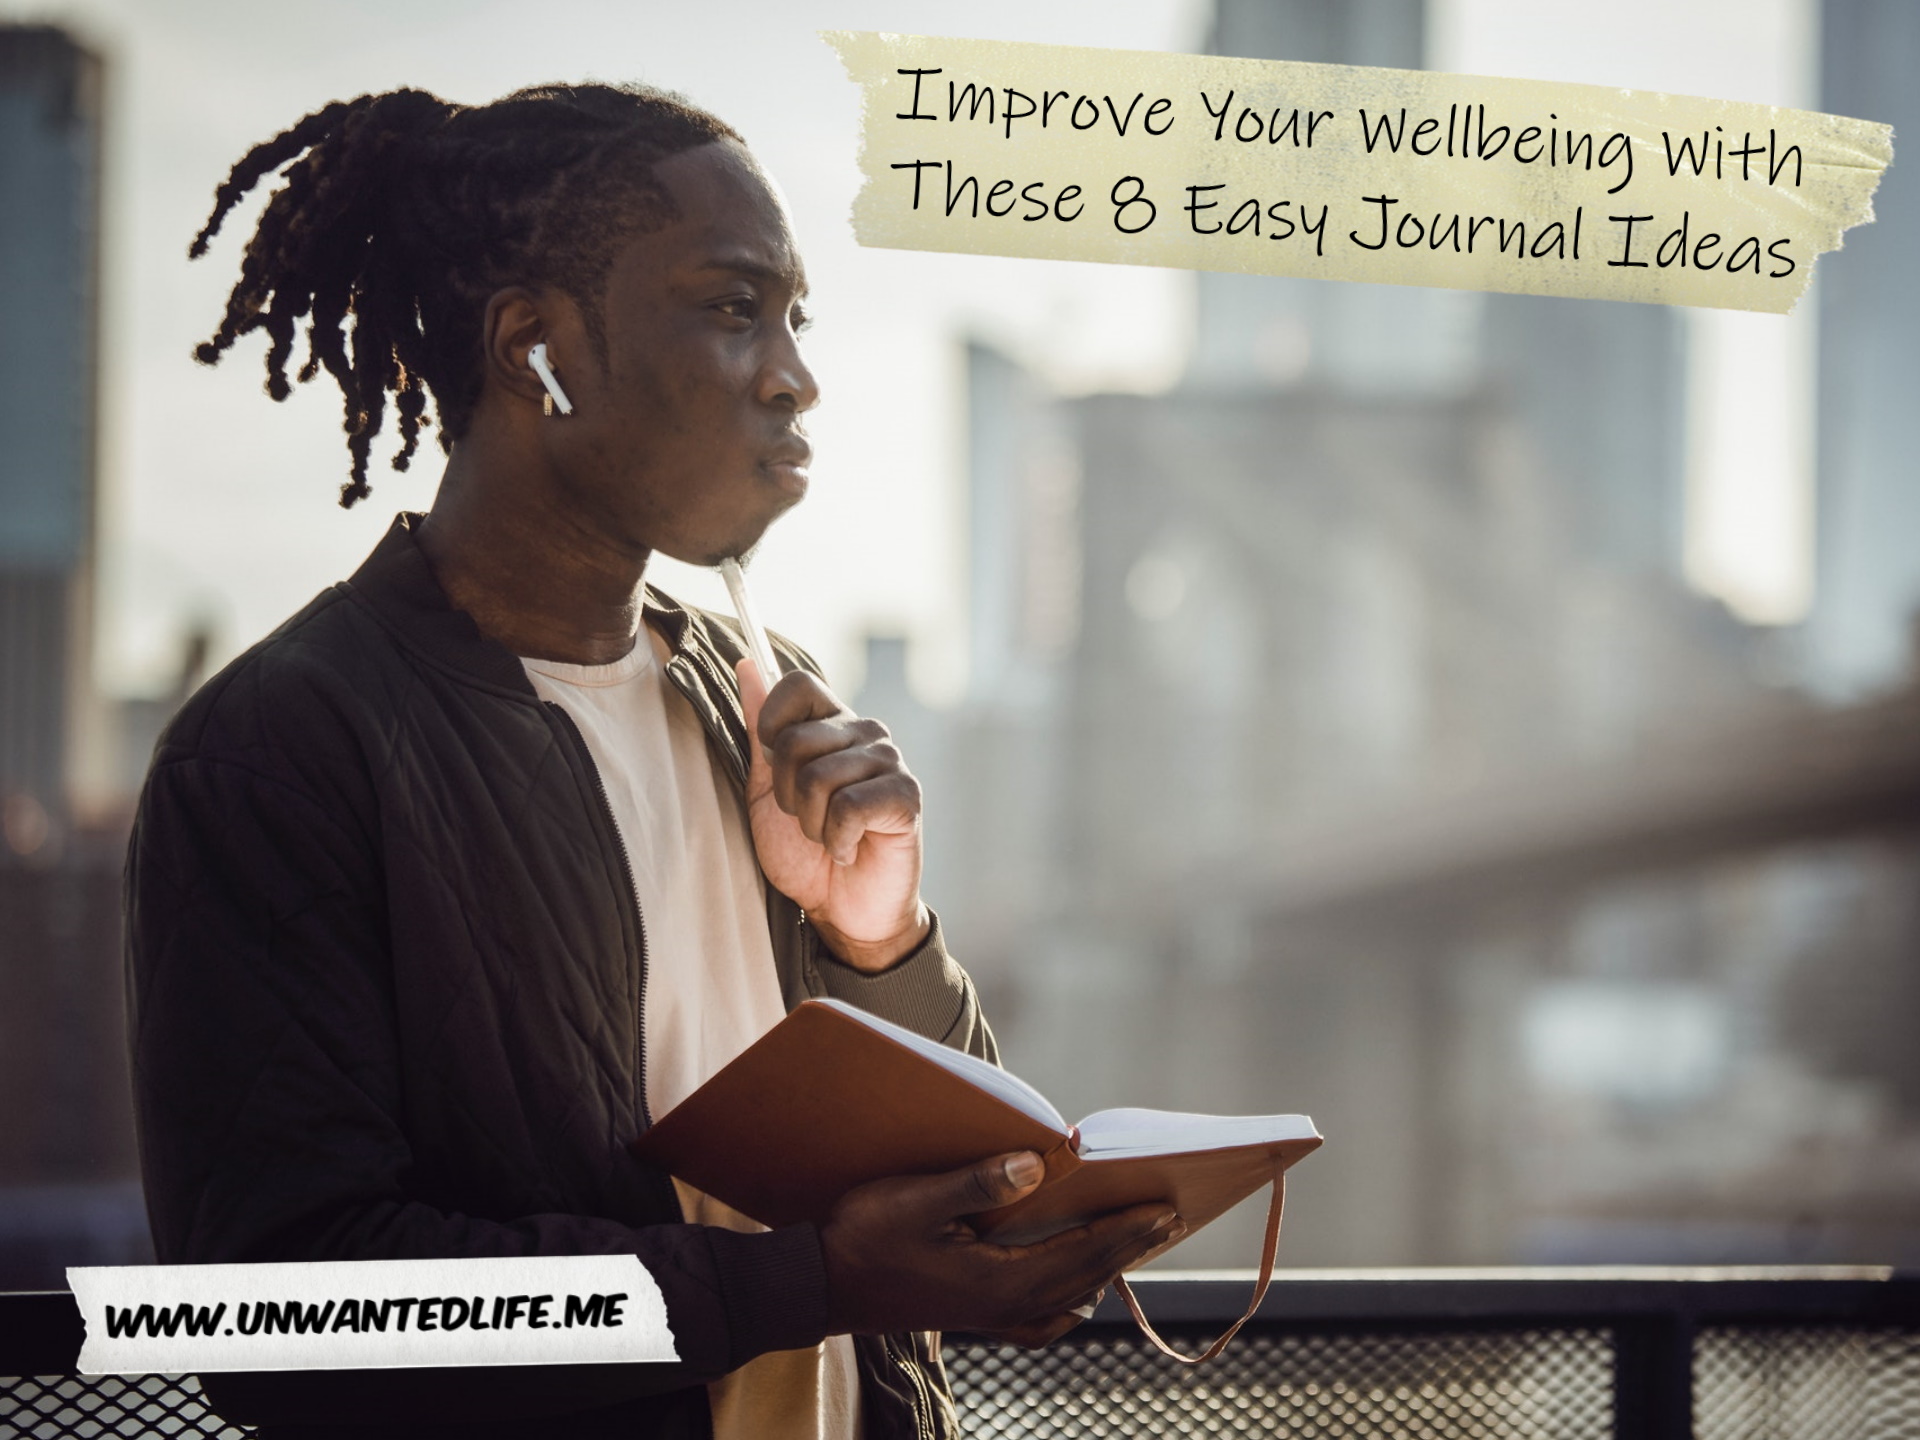 A photo of a Black man with dreadlocks in New York thinking while writing in their journal to represent the topic of the article - Improve Your Wellbeing With These 8 Easy Journal Ideas